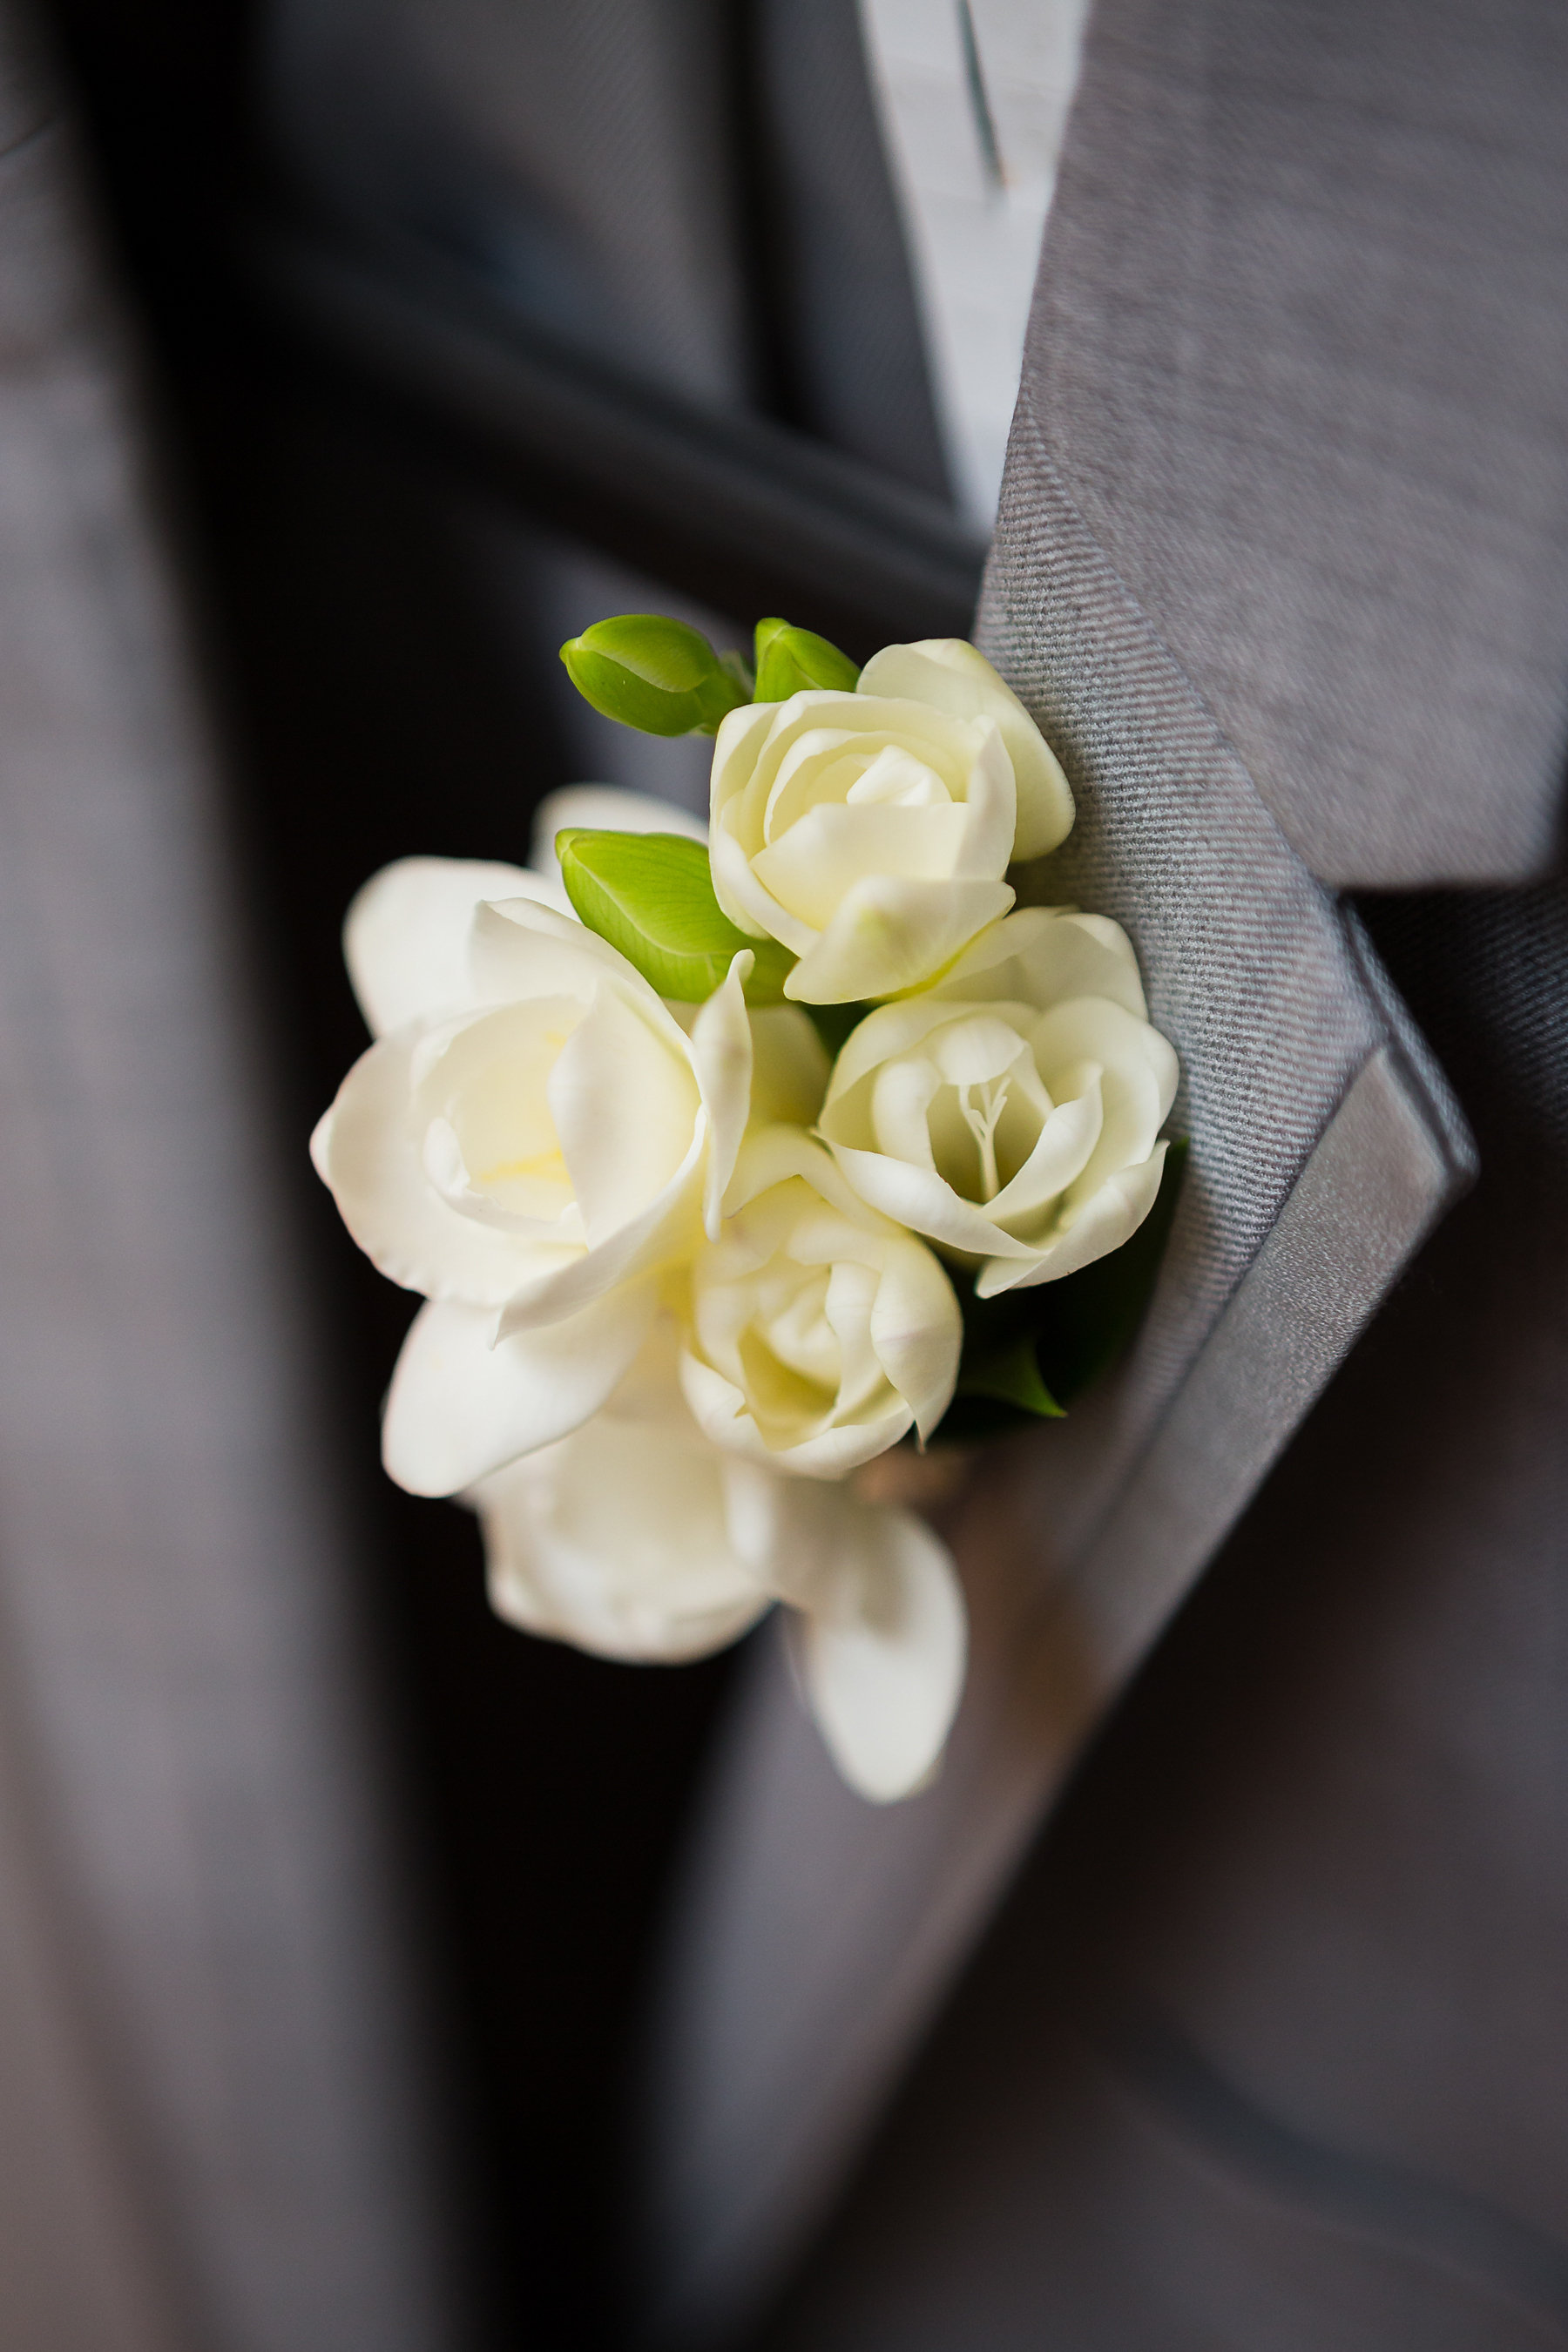 Simple rose boutonniere for the groom